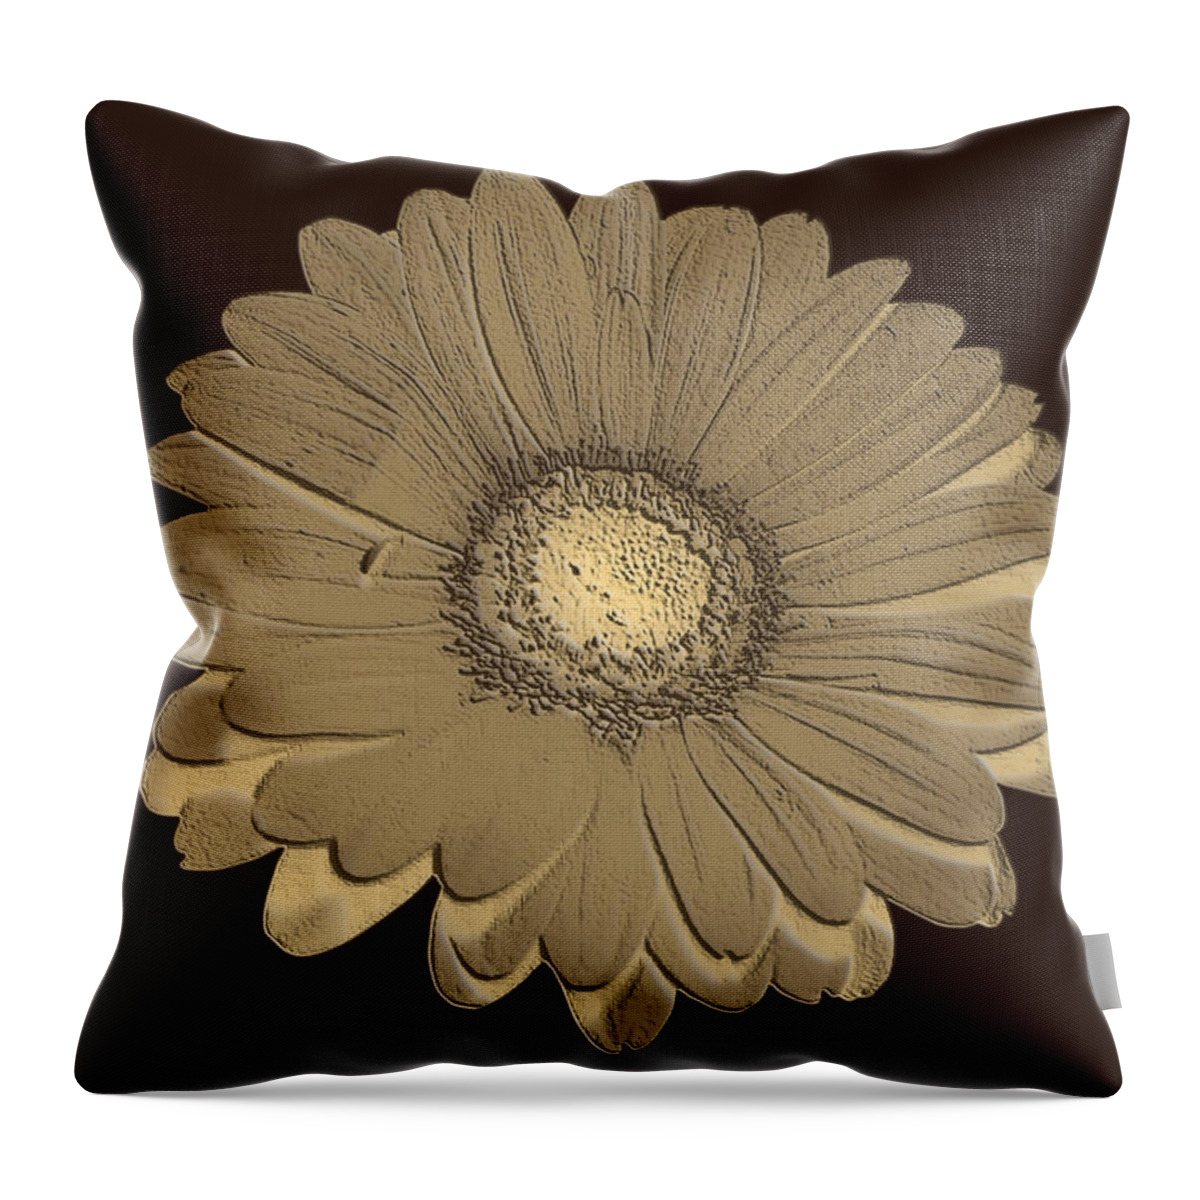 Brown Throw Pillow featuring the digital art Brown Art by Milena Ilieva